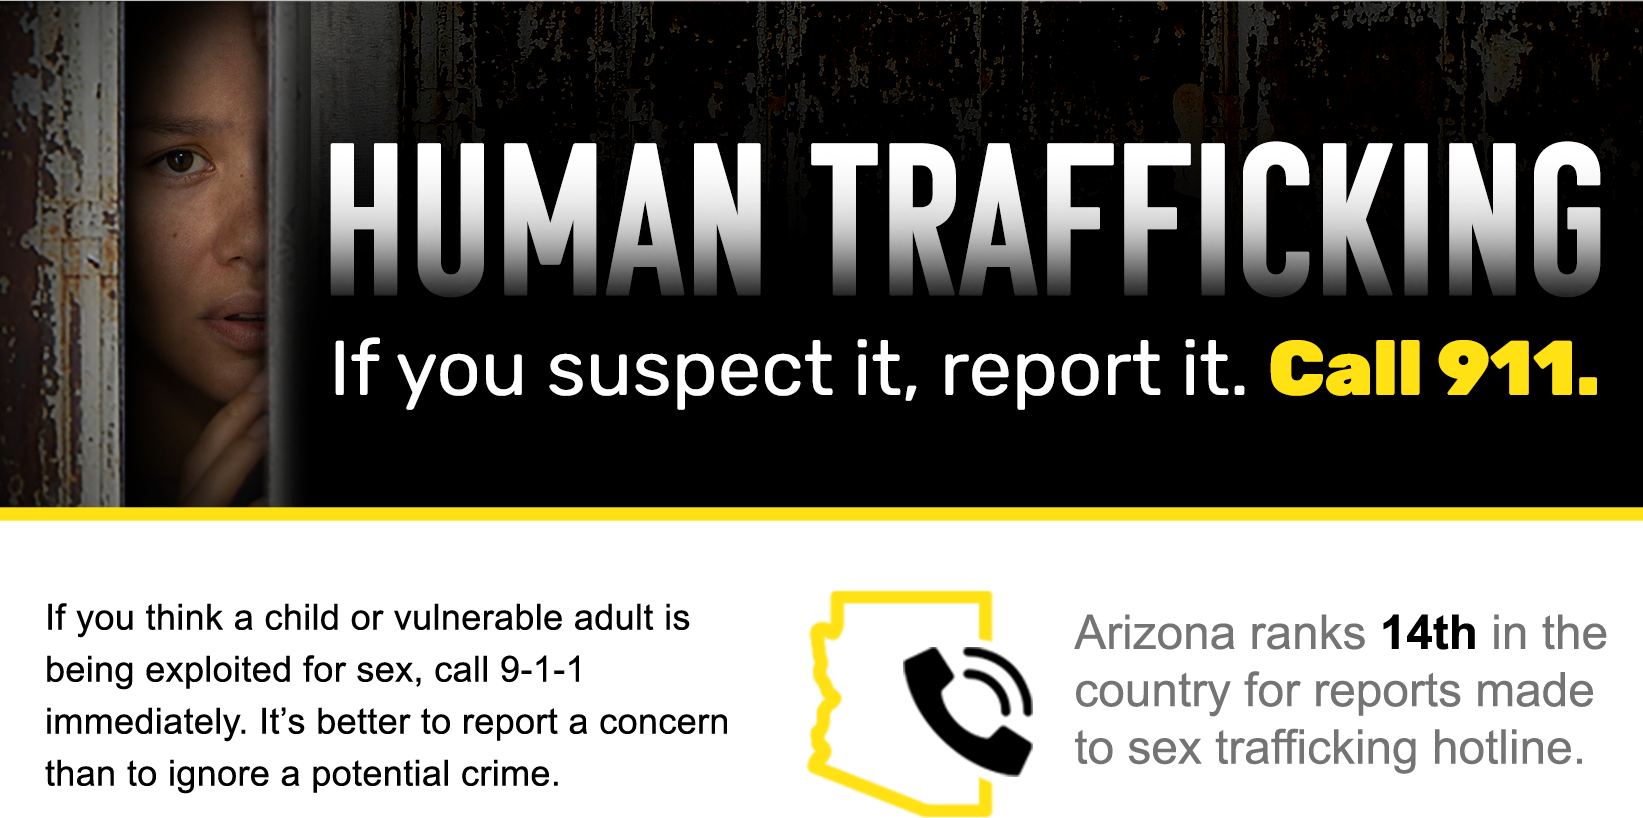 Human Trafficking. If you suspect it, report it.